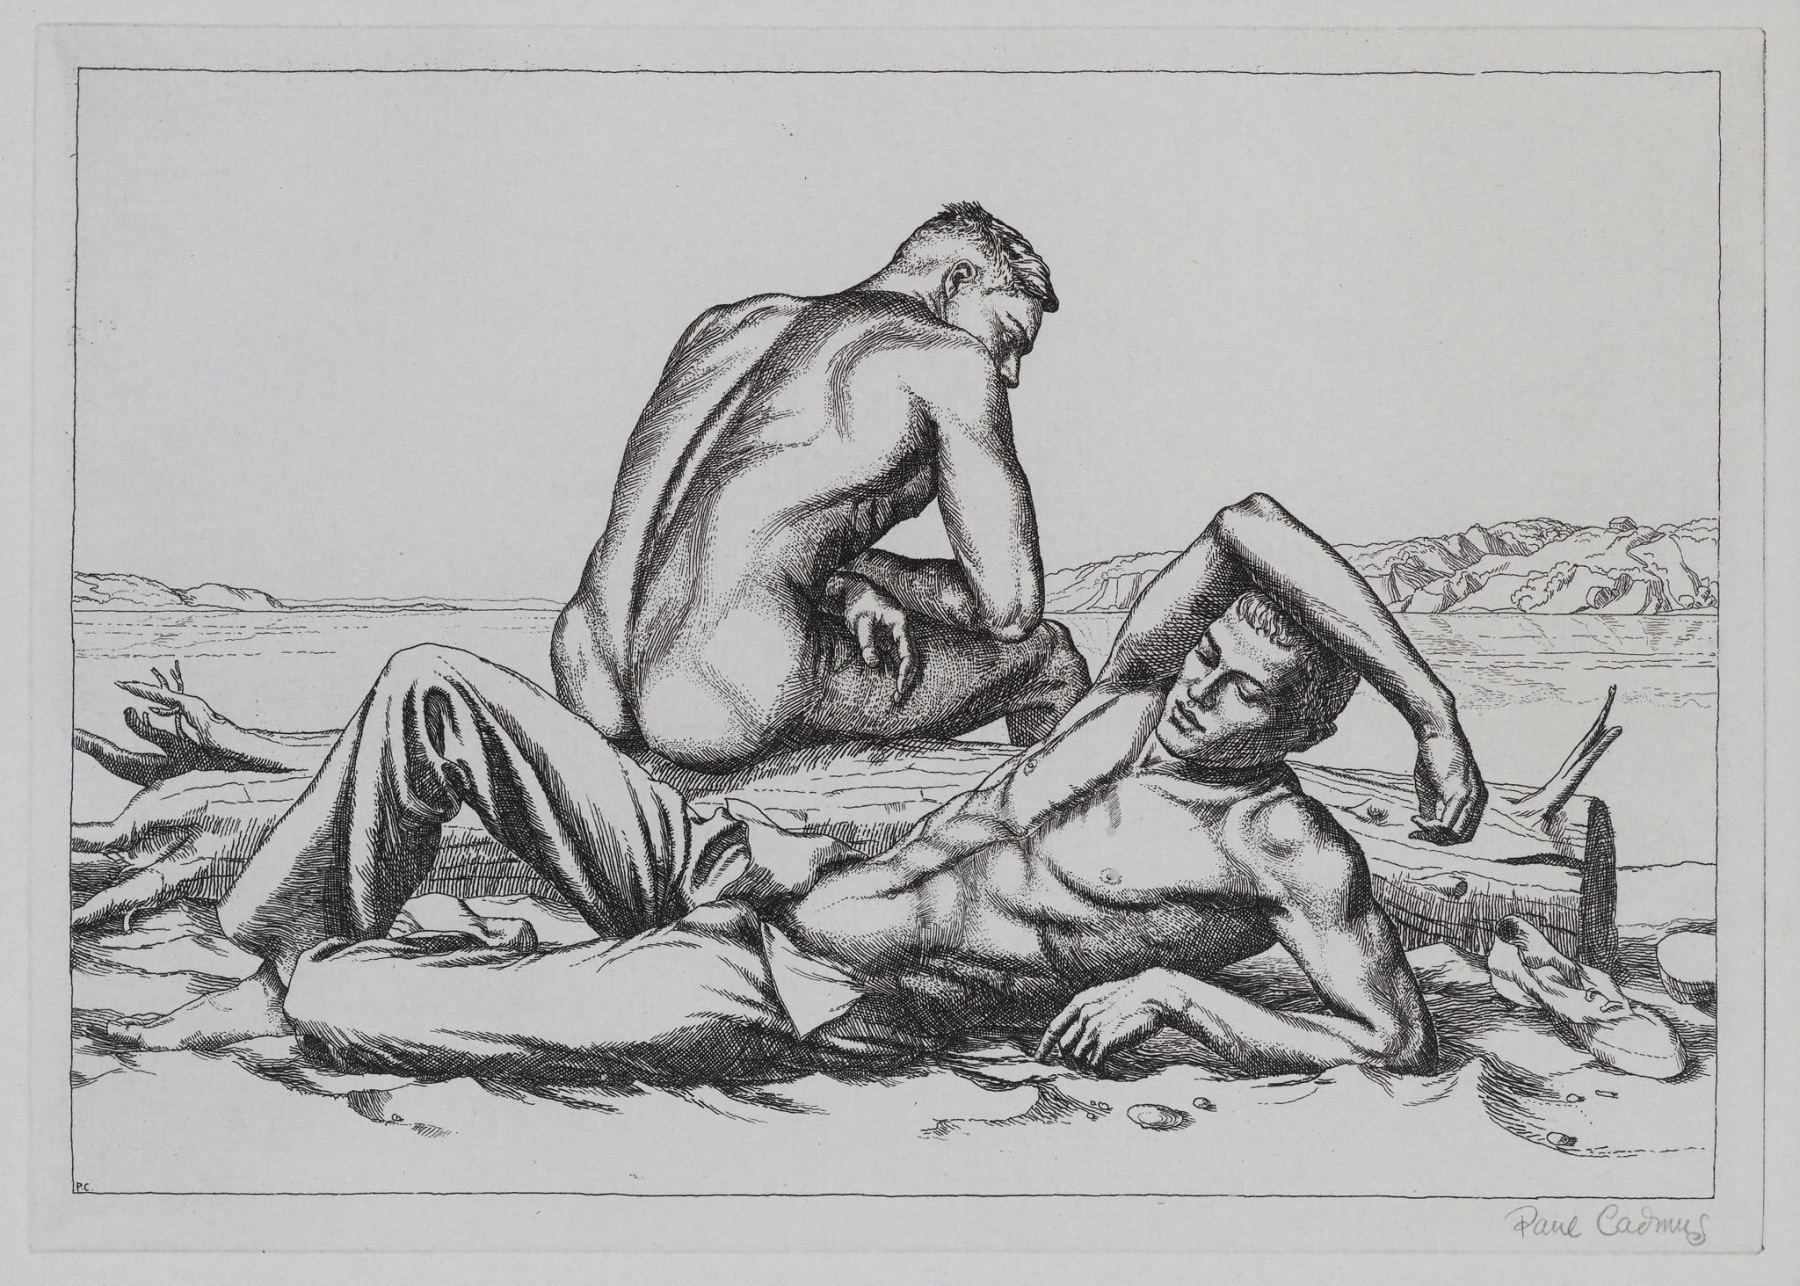 Two Boys on a Beach No. 2, 1939, Etching, 6 5/8 x 9 1/4 inches